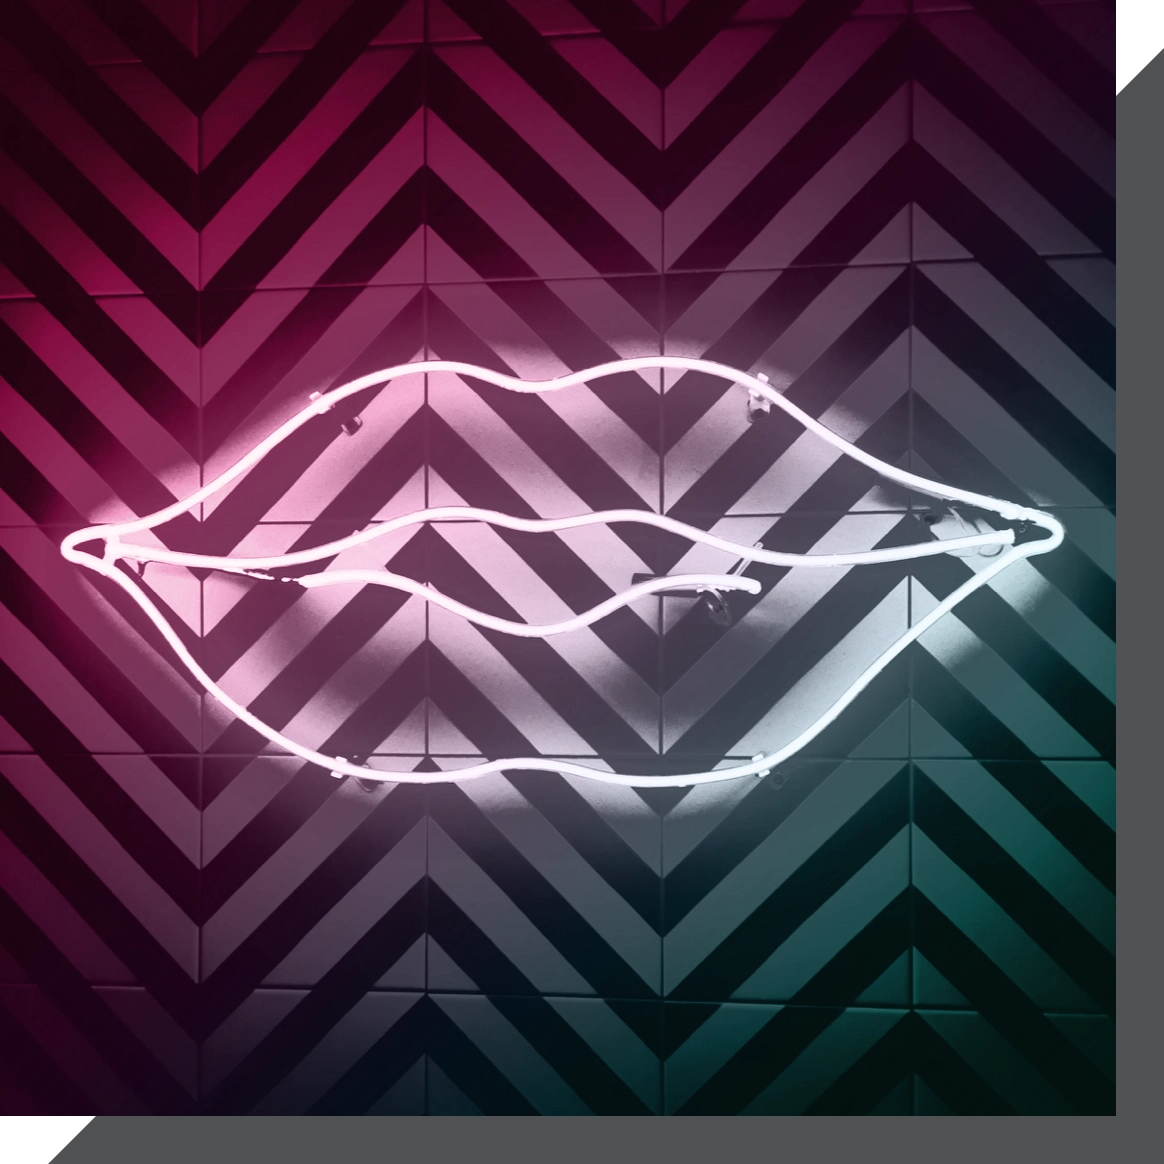 A neon light sculpture in the shape of lips is mounted on a chevron-patterned wall. The wall features a gradient of dark pink and teal colors. The neon light is white and is the focal point of the image.